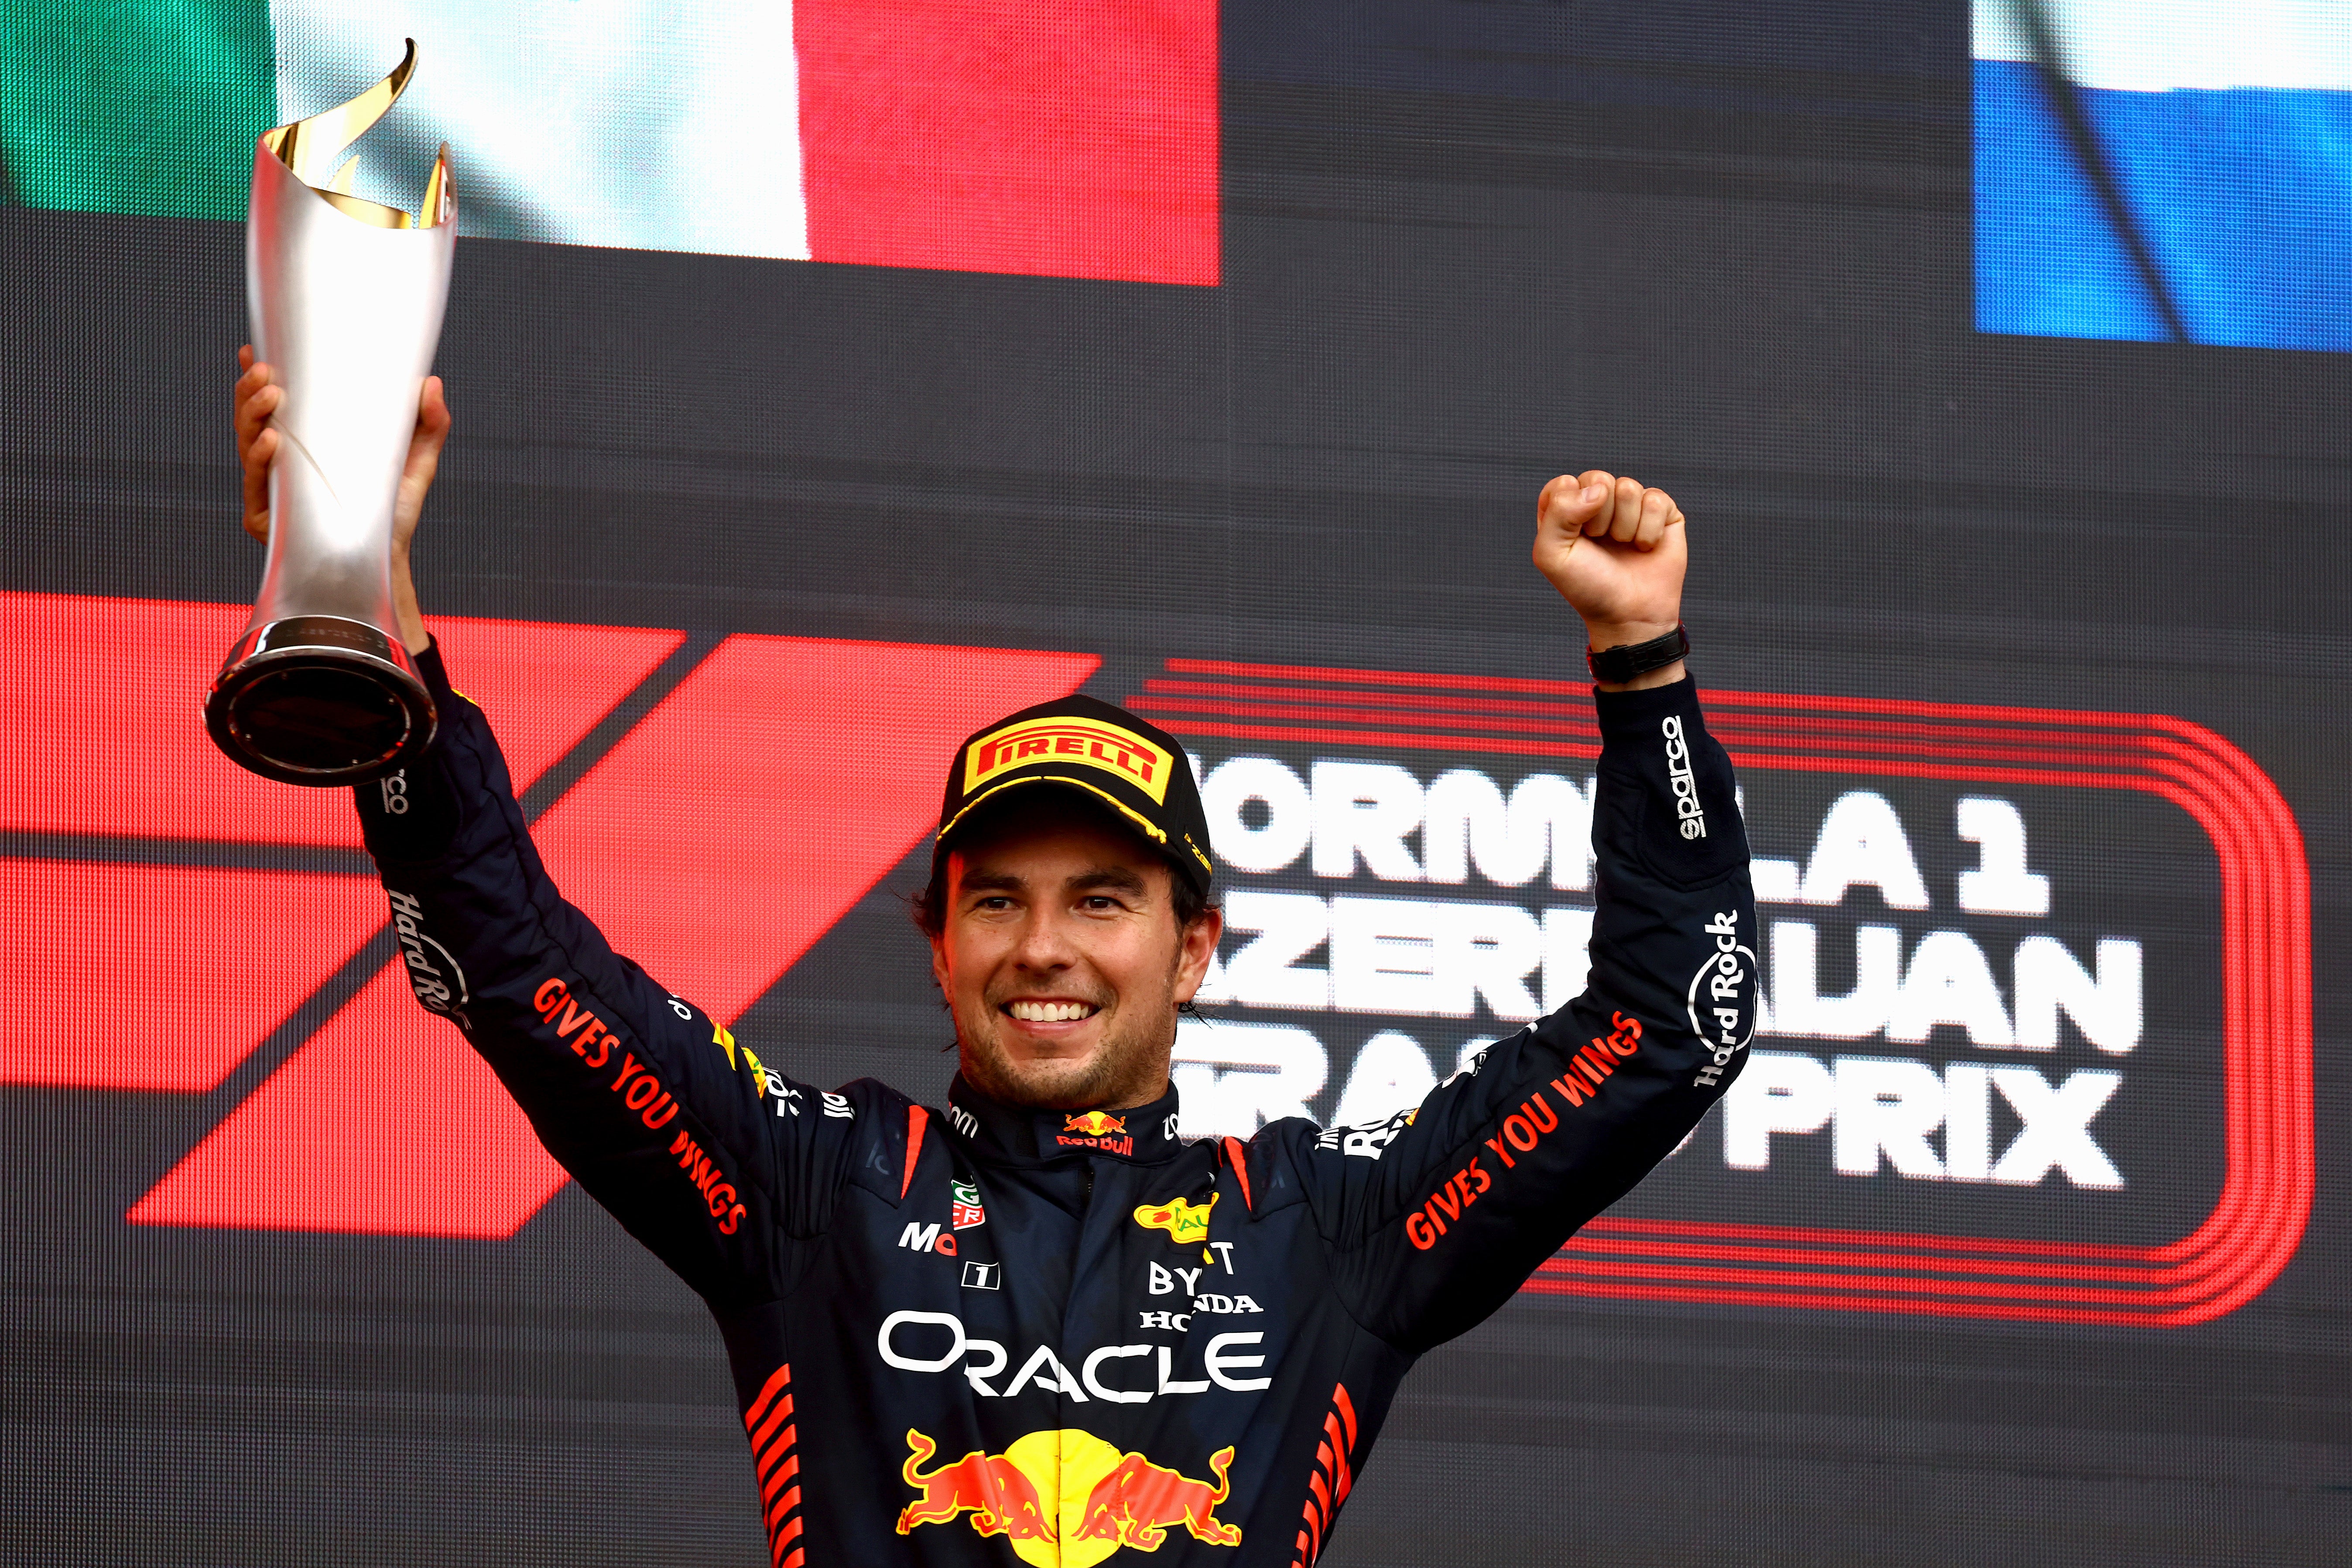 Perez claimed his fifth victory for Red Bull in Baku on Sunday; all of his wins have been on street tracks